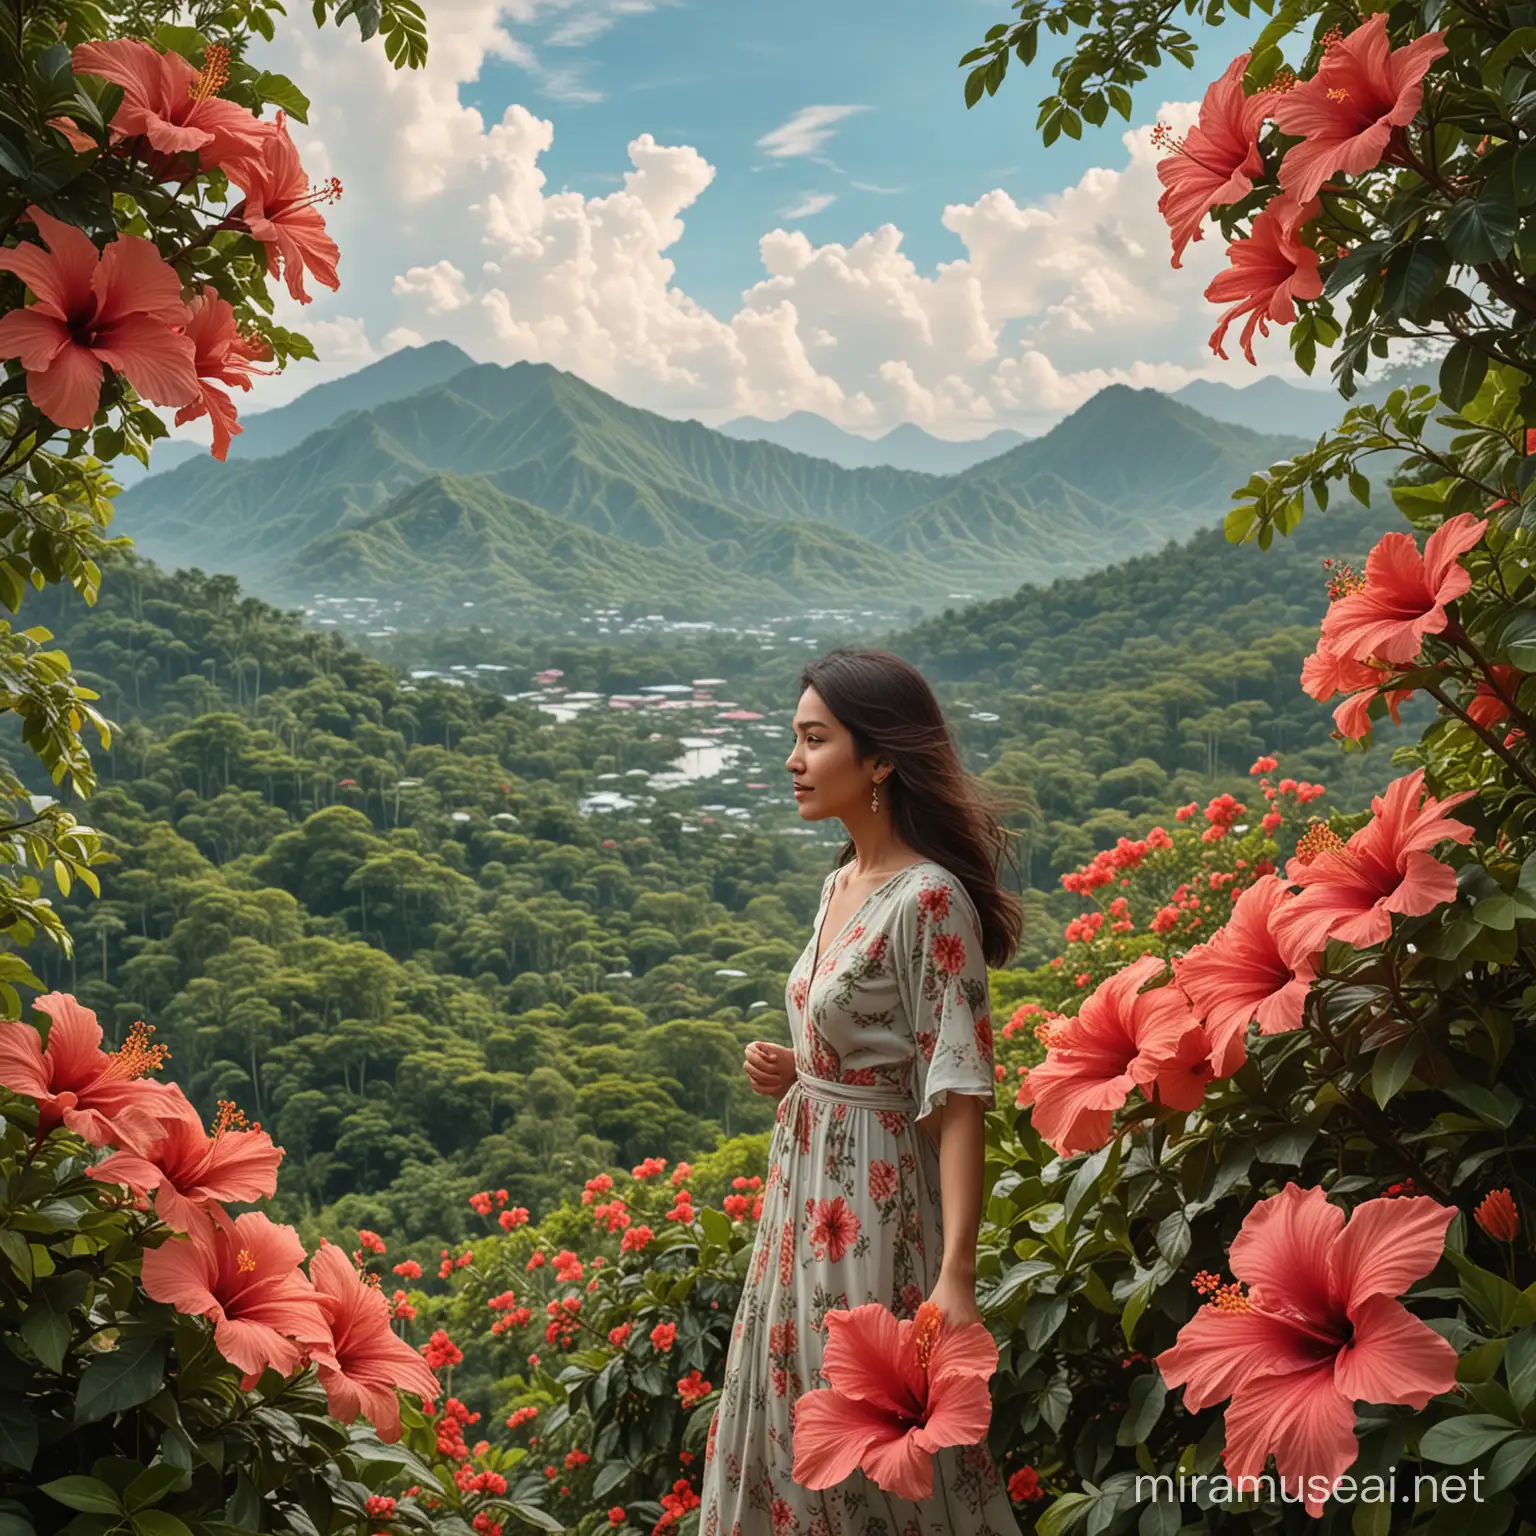 Raya's surroundings reflect the lush landscapes of Malaysia, with verdant forests, tropical blooms, and majestic mountains in the distance. She is often depicted against a backdrop of hibiscus flowers in full bloom, their petals swaying gently in the breeze.